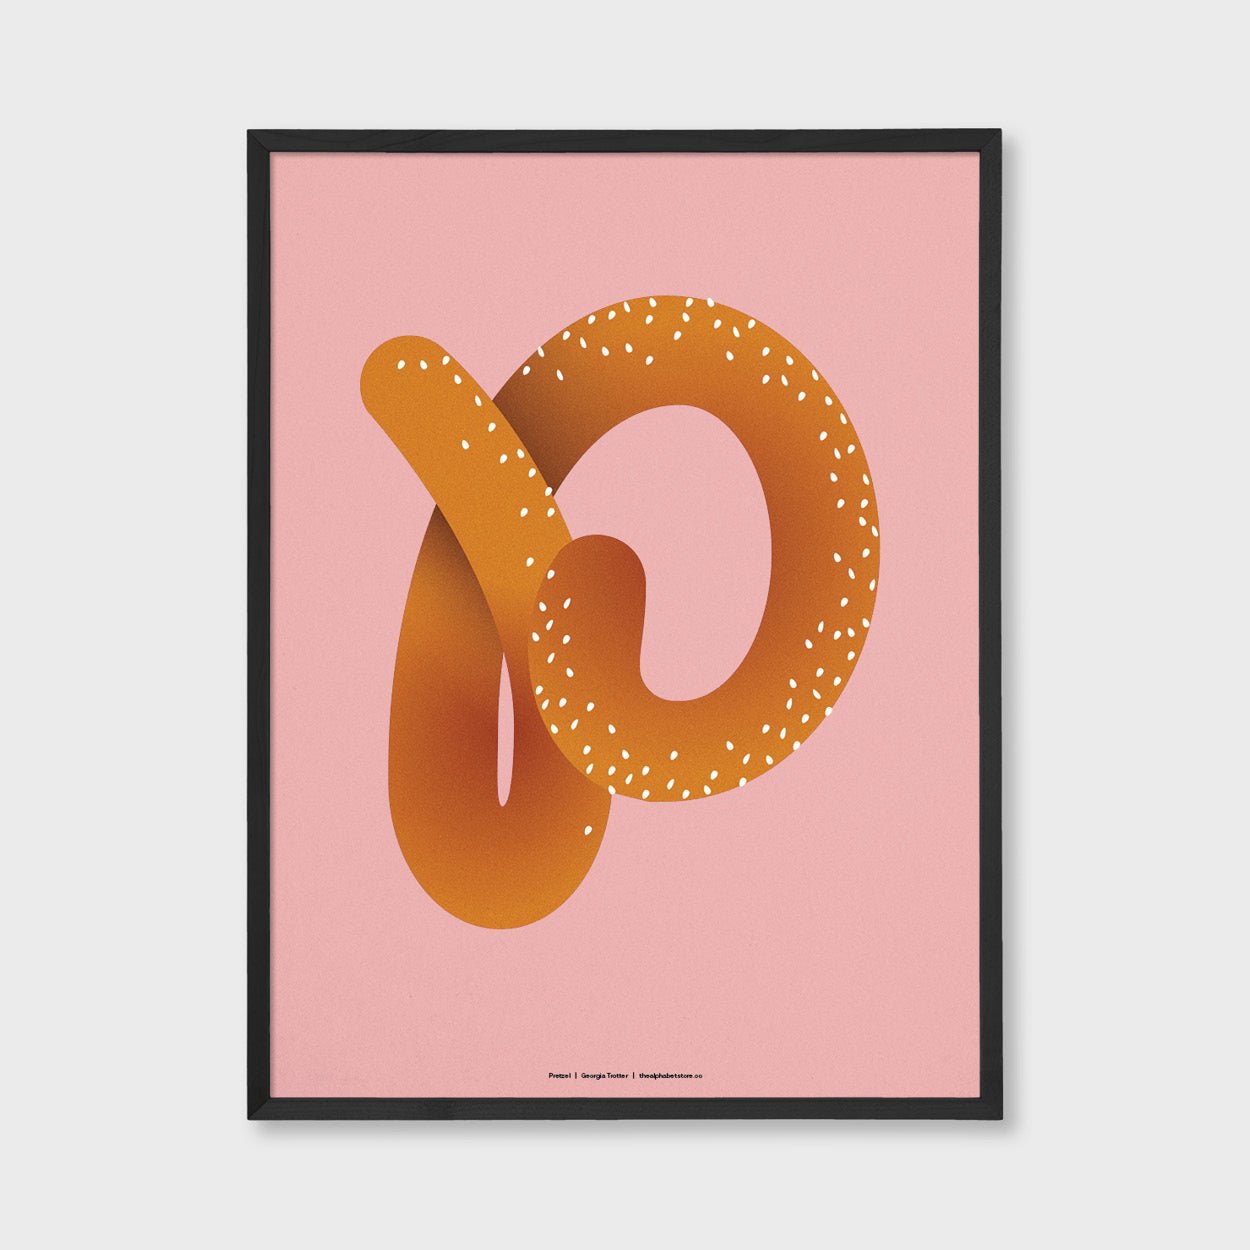  Extruded Food Collection Pretzel Artist Georgia Trotter The alphabet store 